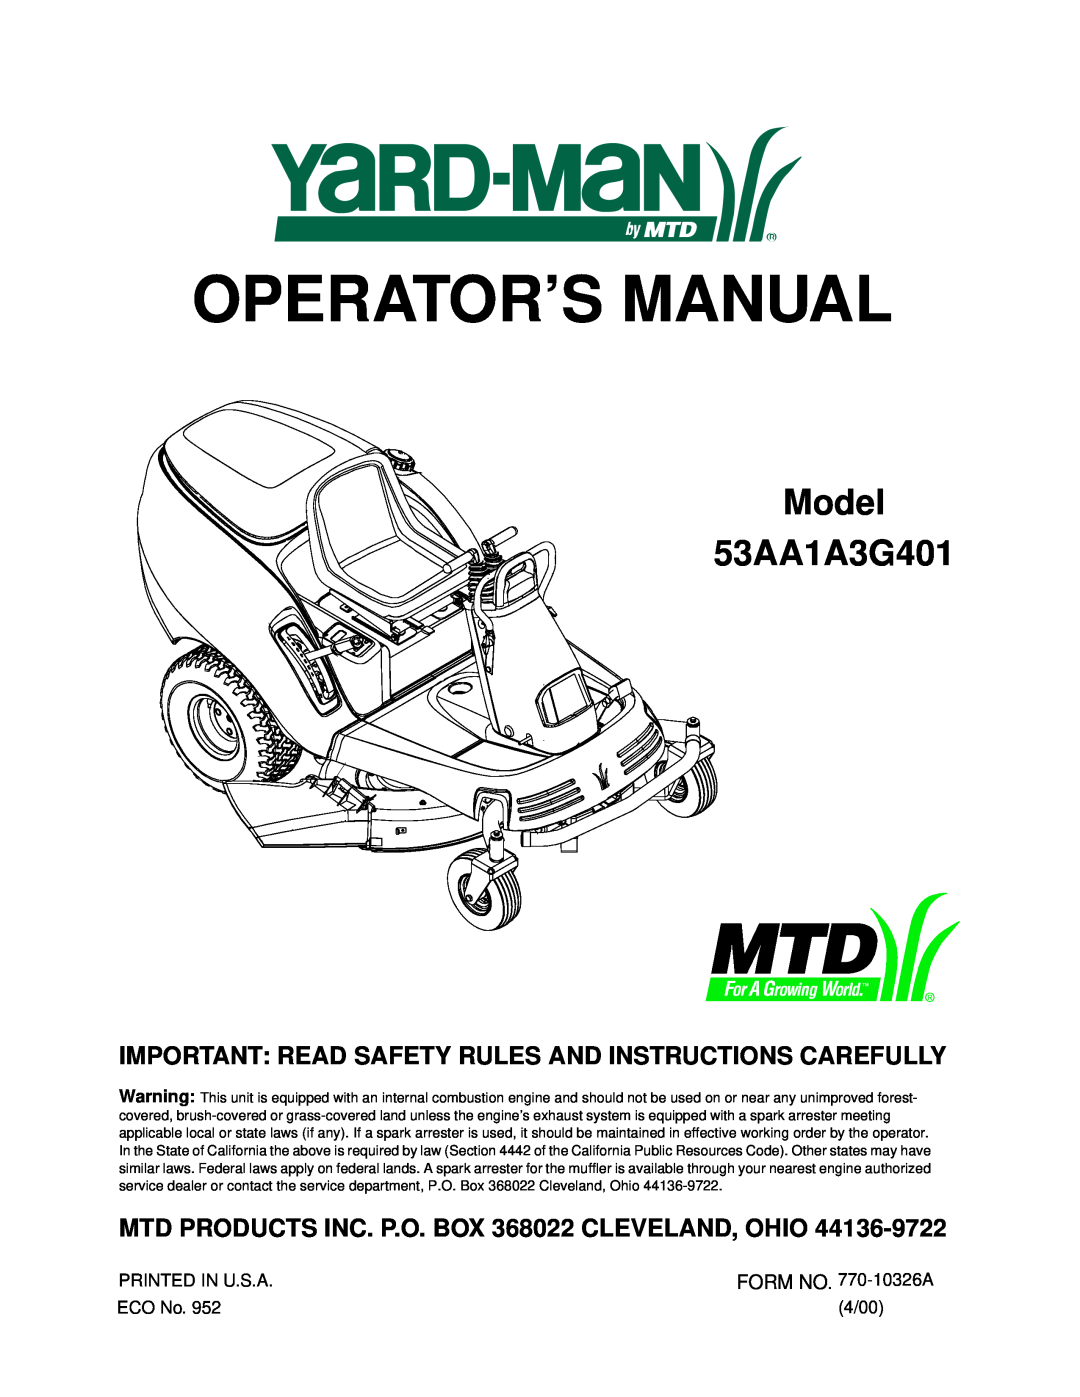 Yard-Man manual Important Read Safety Rules And Instructions Carefully, Operator’S Manual, Model 53AA1A3G401 